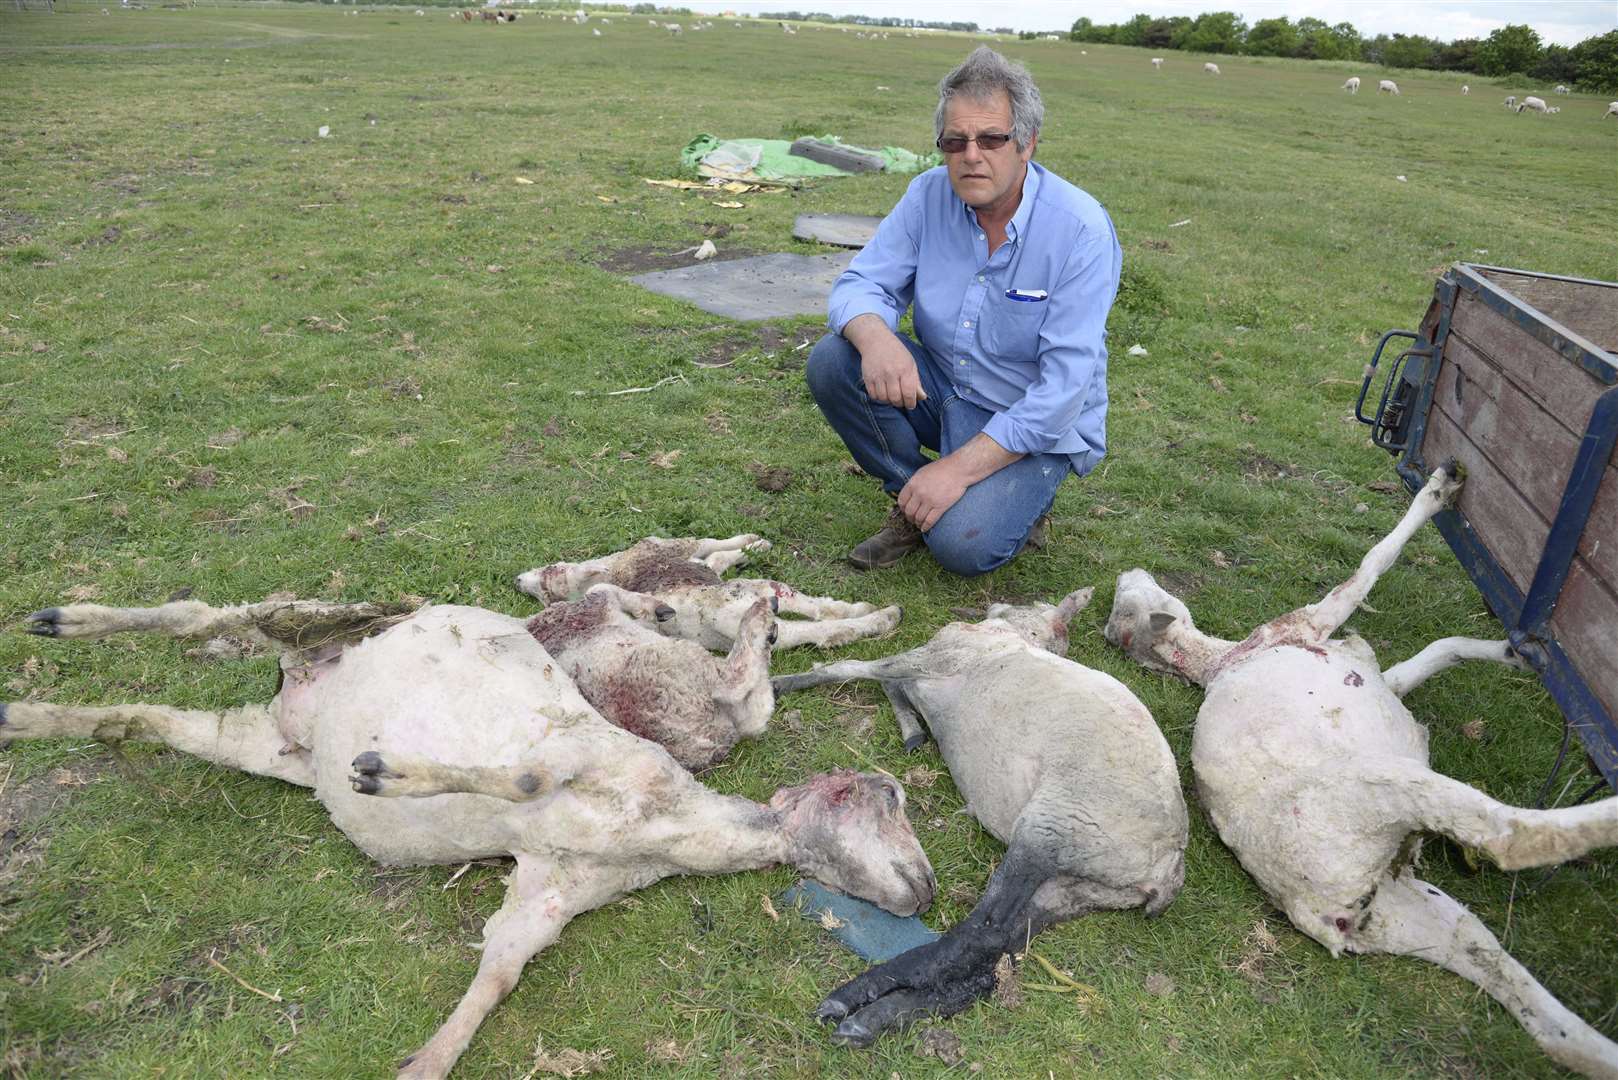 Farmer David Mosdell and some of the dead sheep found in 2015